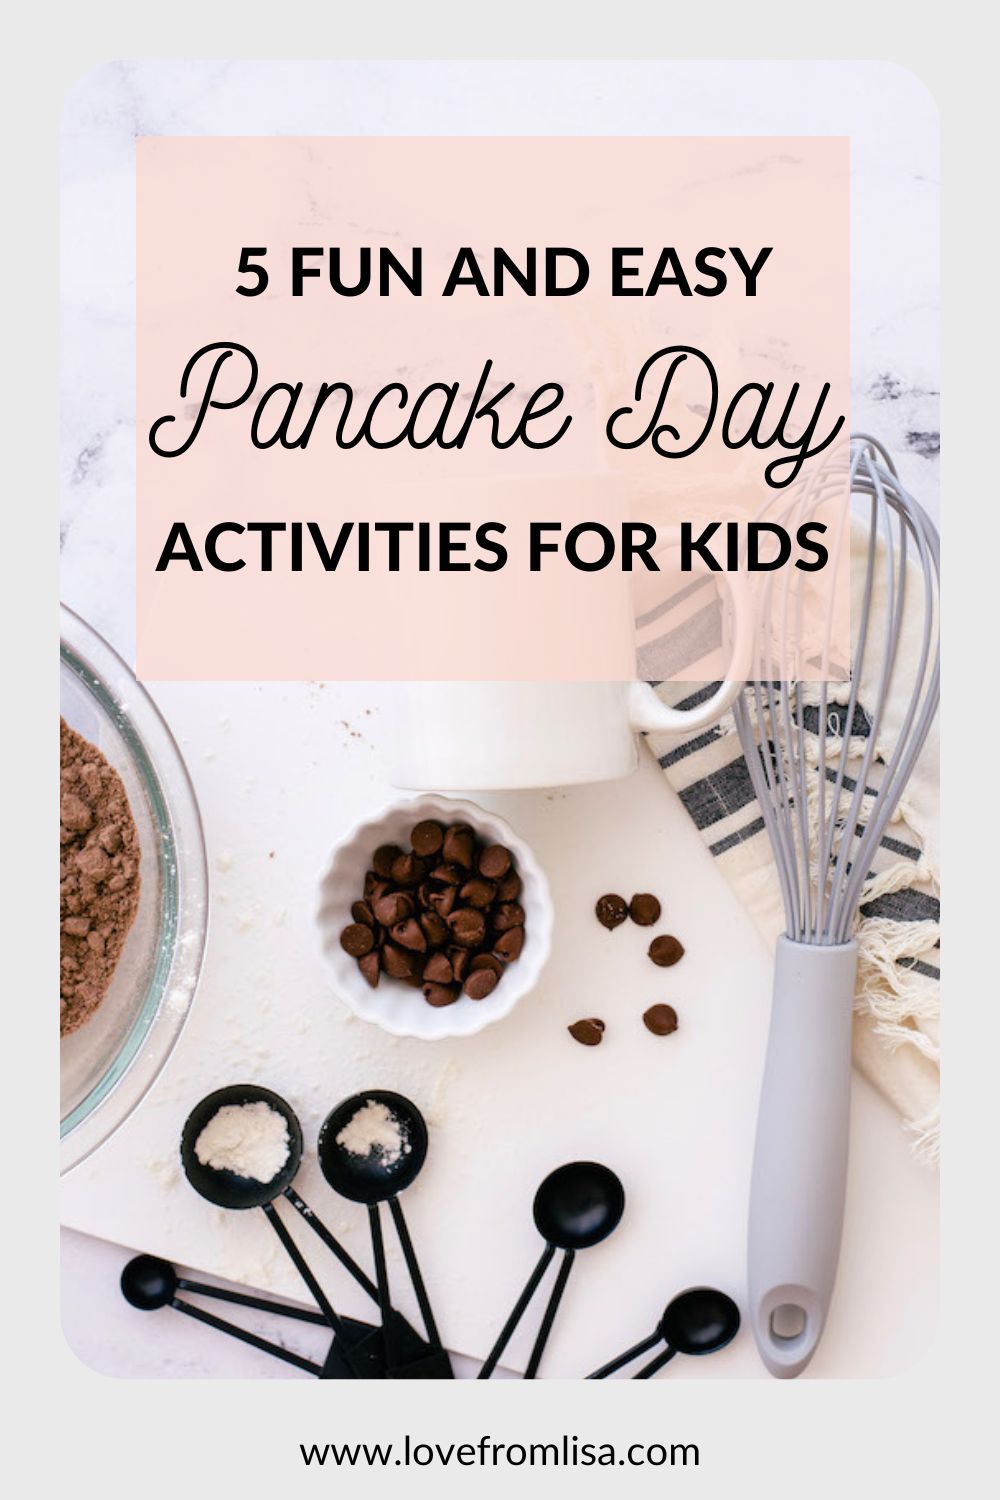 5 fun and easy Pancake Day activities for kids Pinterest Graphic